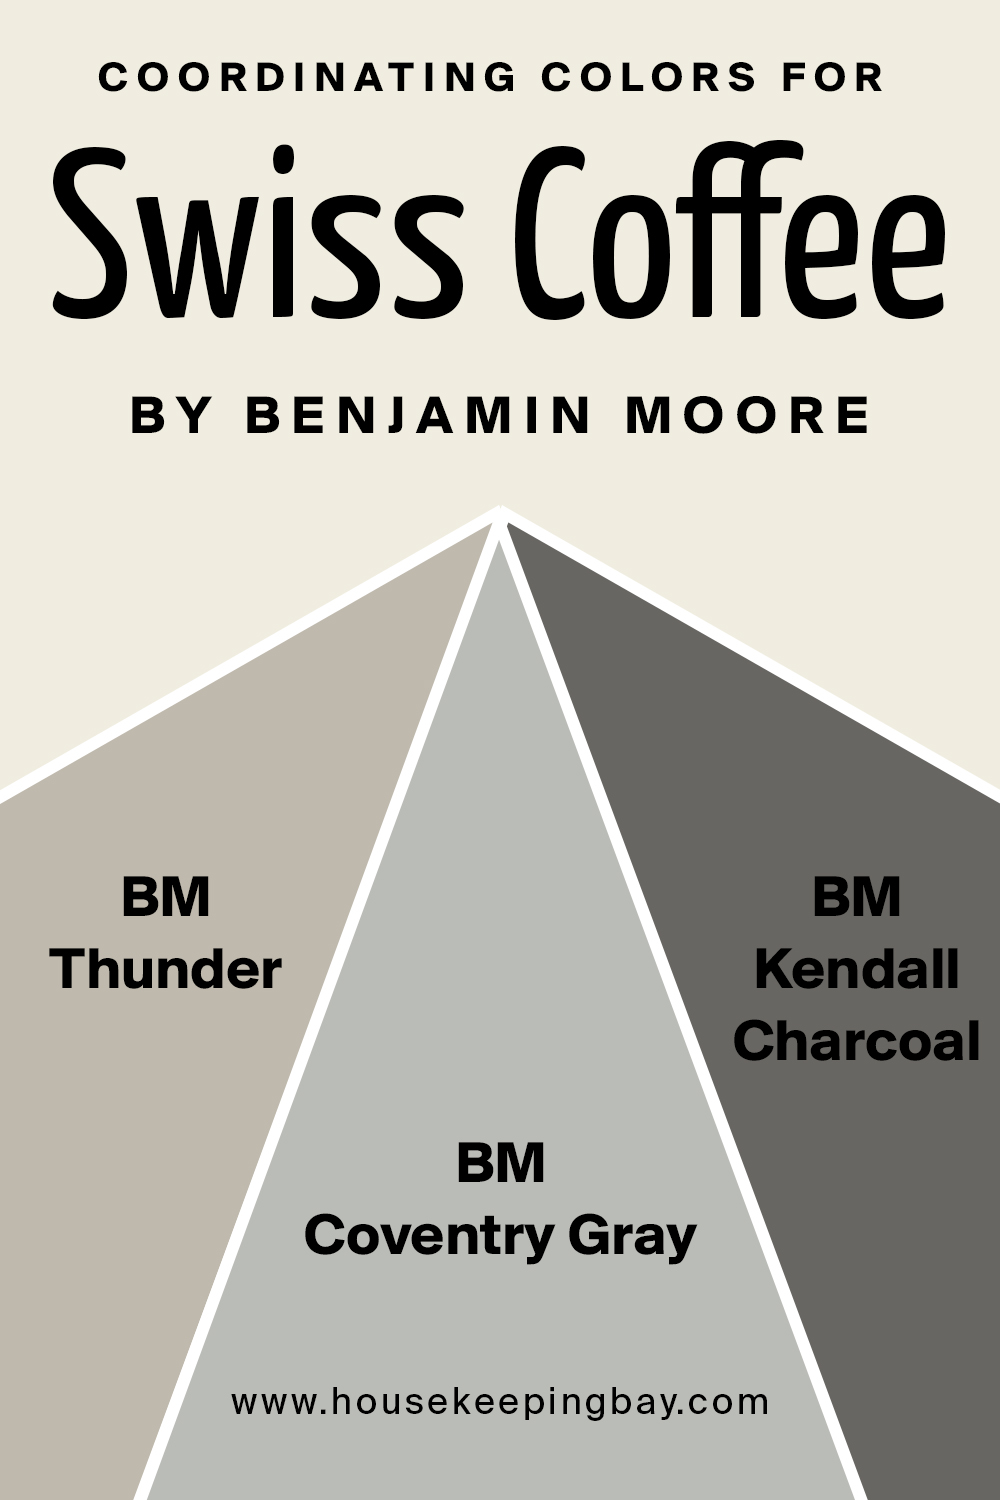 Coordinating Colors for Swiss Coffee by Benjamin Moore